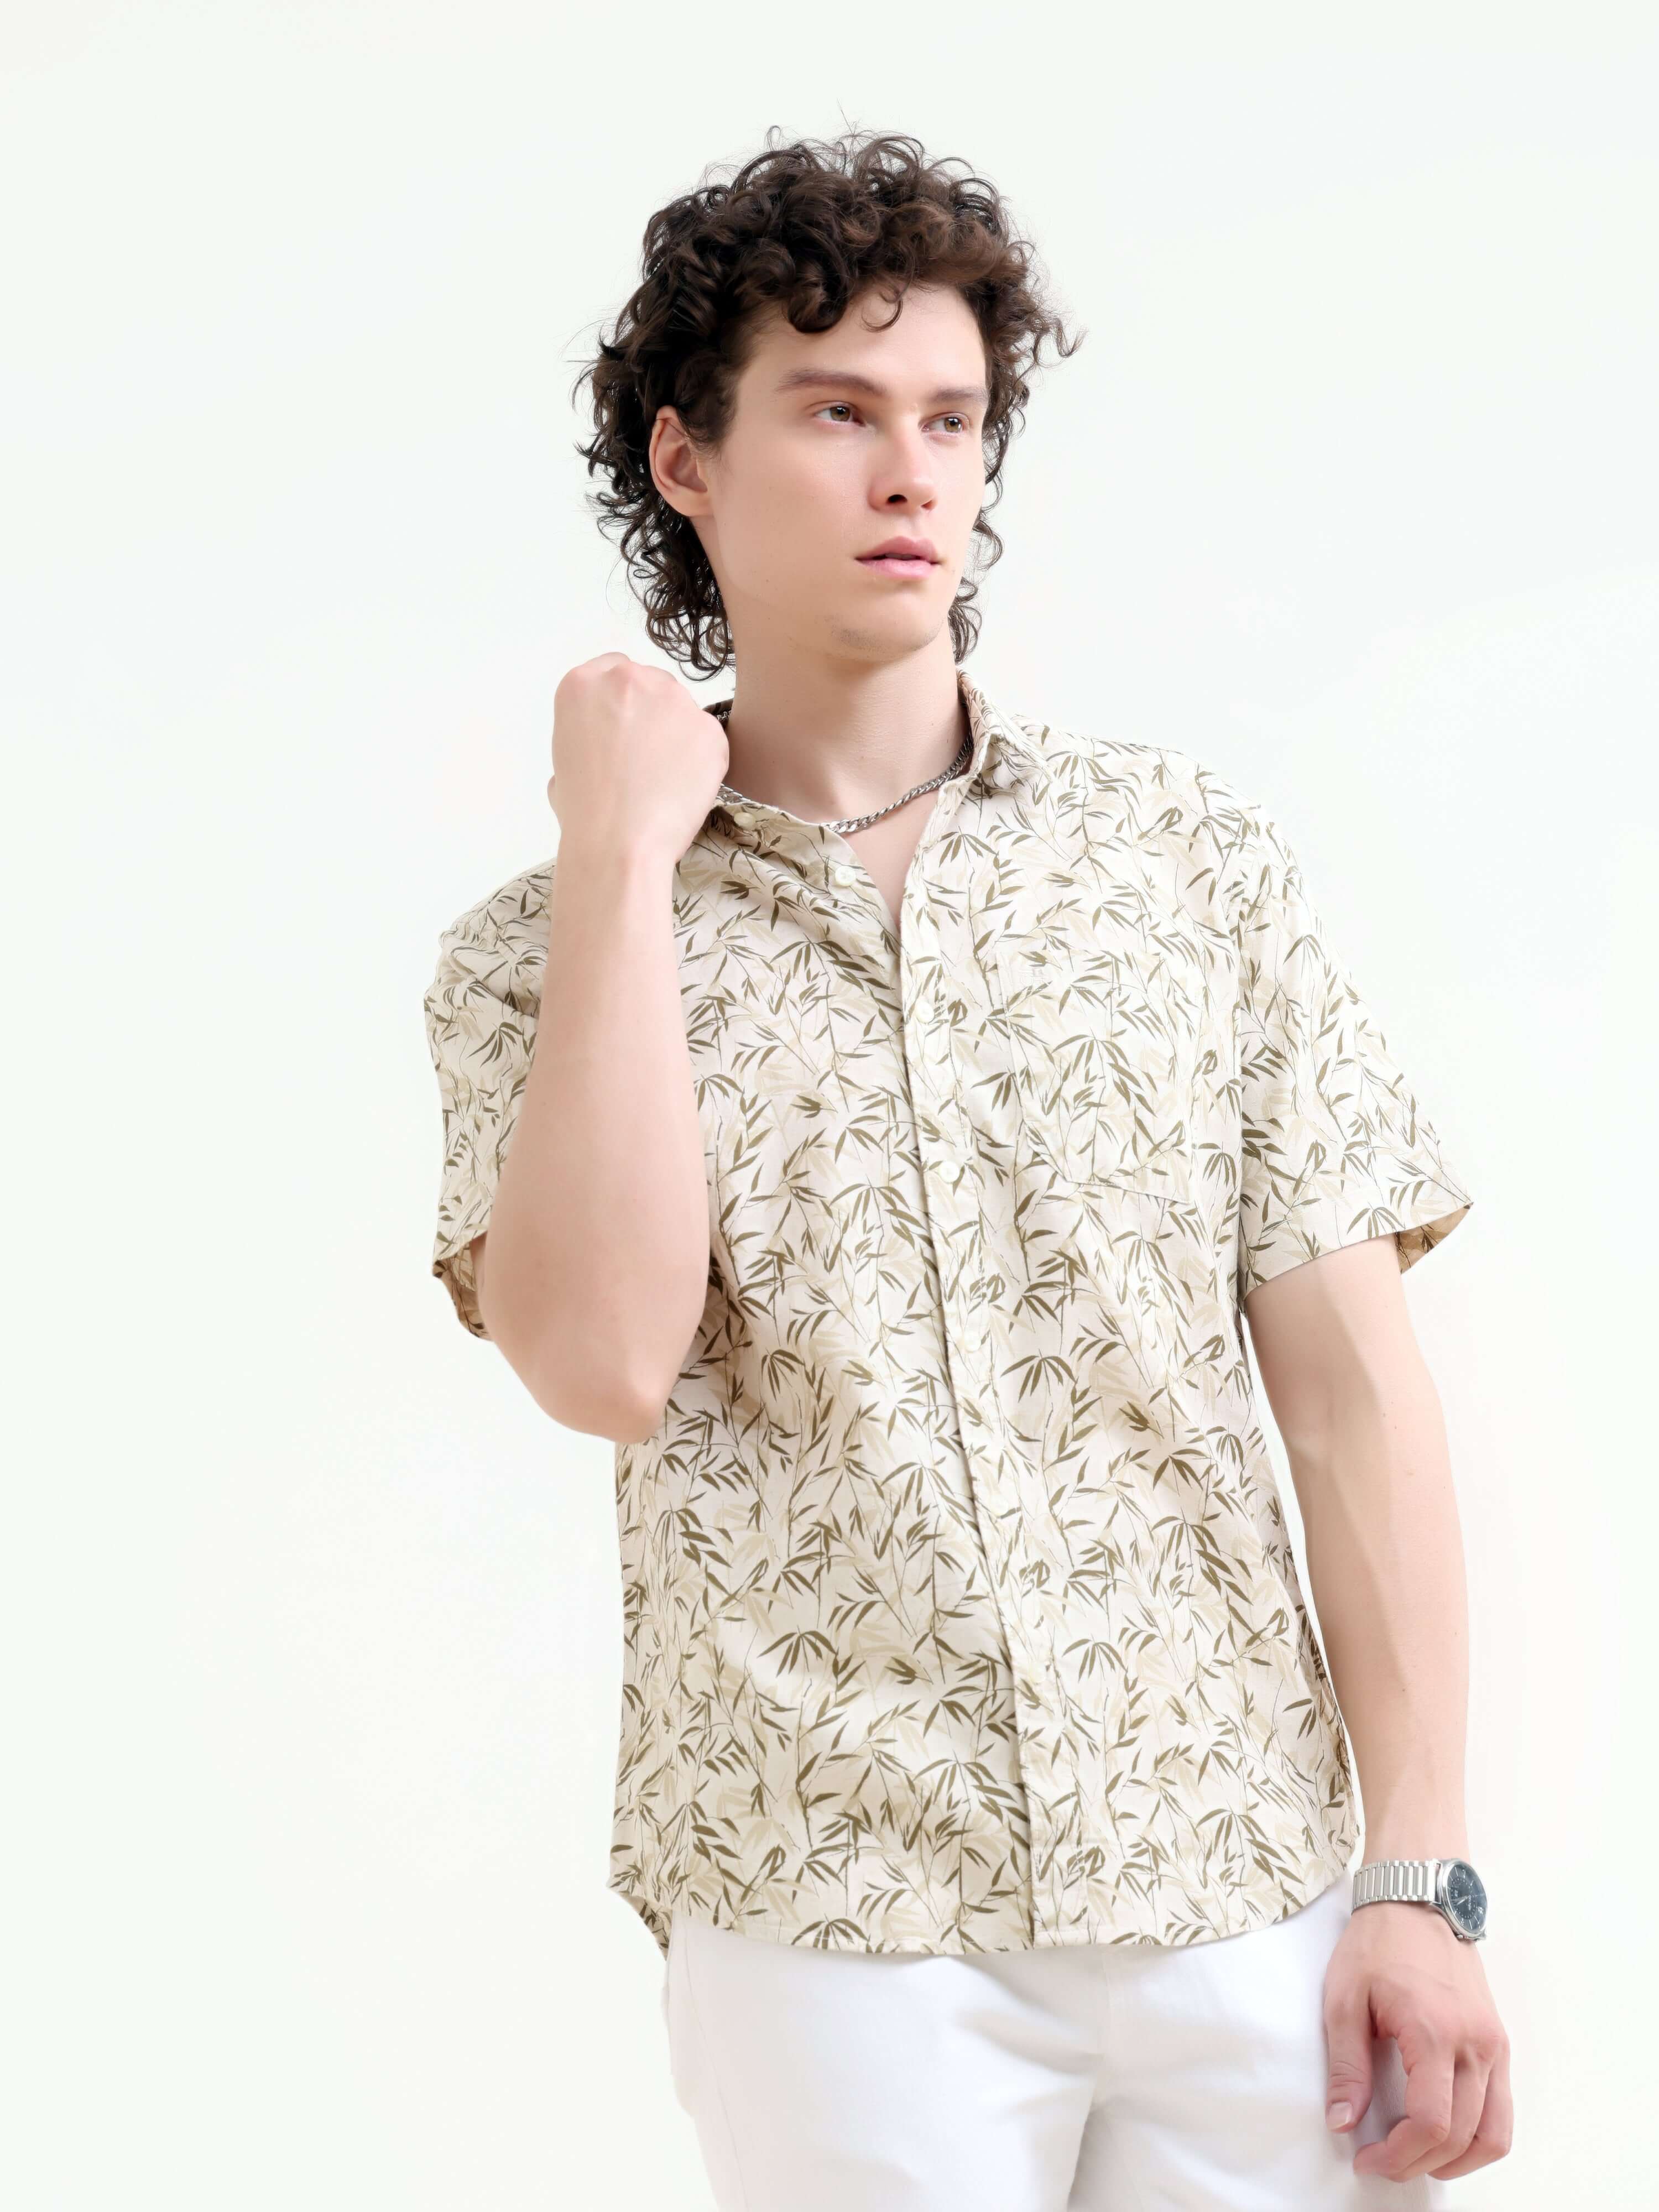 Men's Tropical Sage Printed Shirt - New Arrival shop online at Estilocus. Embrace summer with our Tropical Sage Shirt for men. Lightweight, airy & stylish—perfect for any casual outing. Shop the latest in summer fashion!